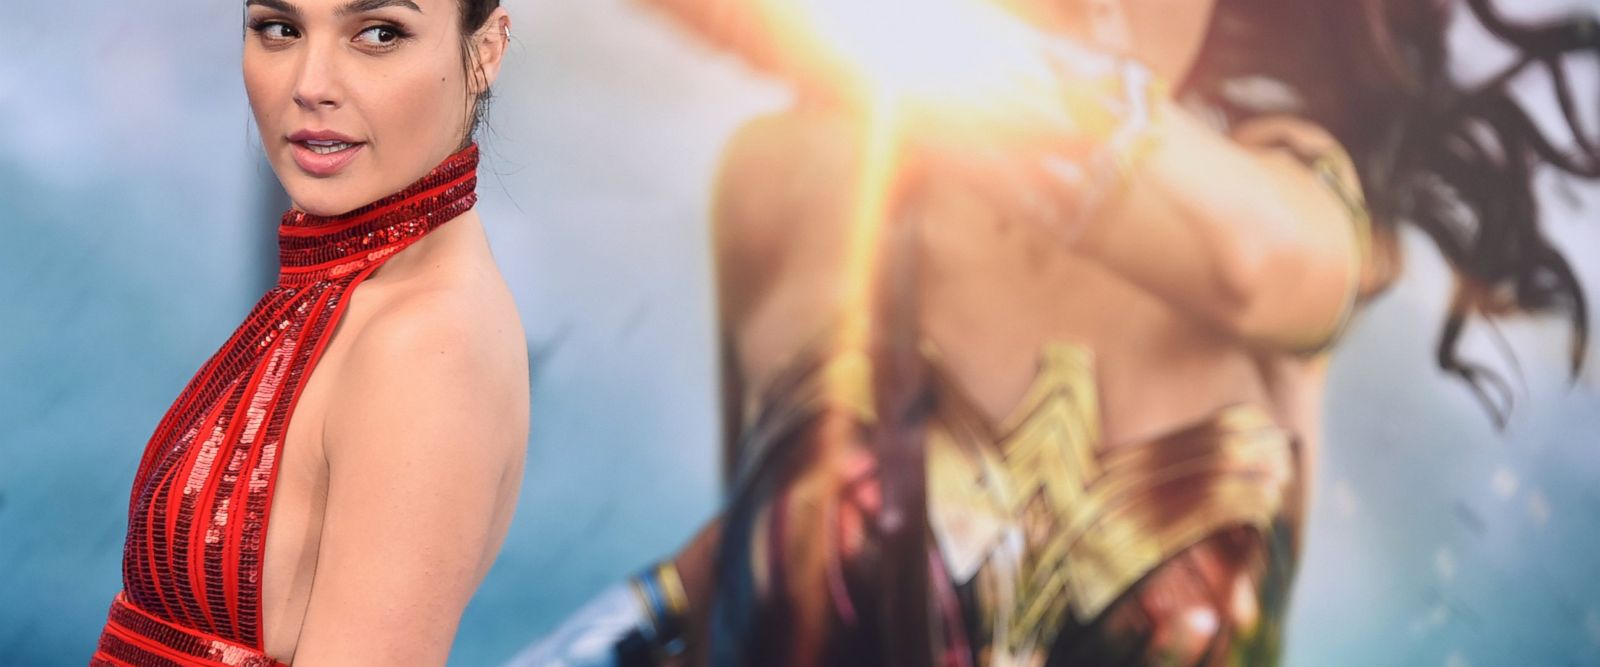 Some women-only screenings planned for 'Wonder Woman'